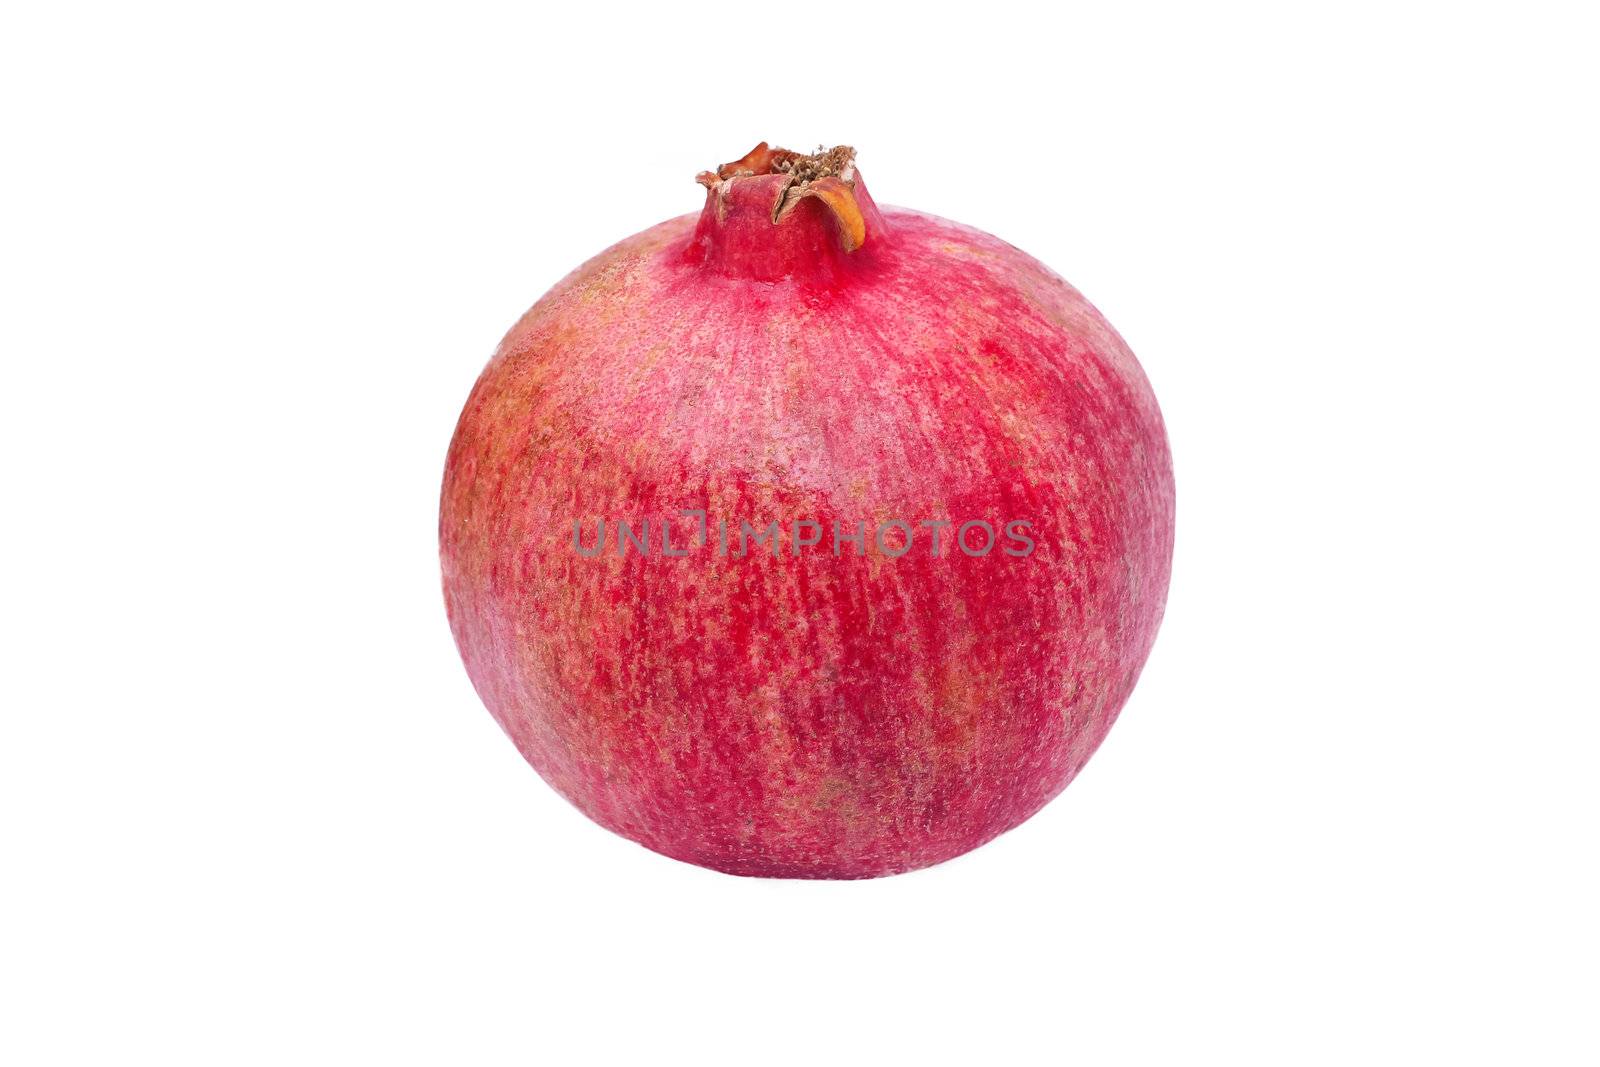 One whole pomegranate on white background by NickNick